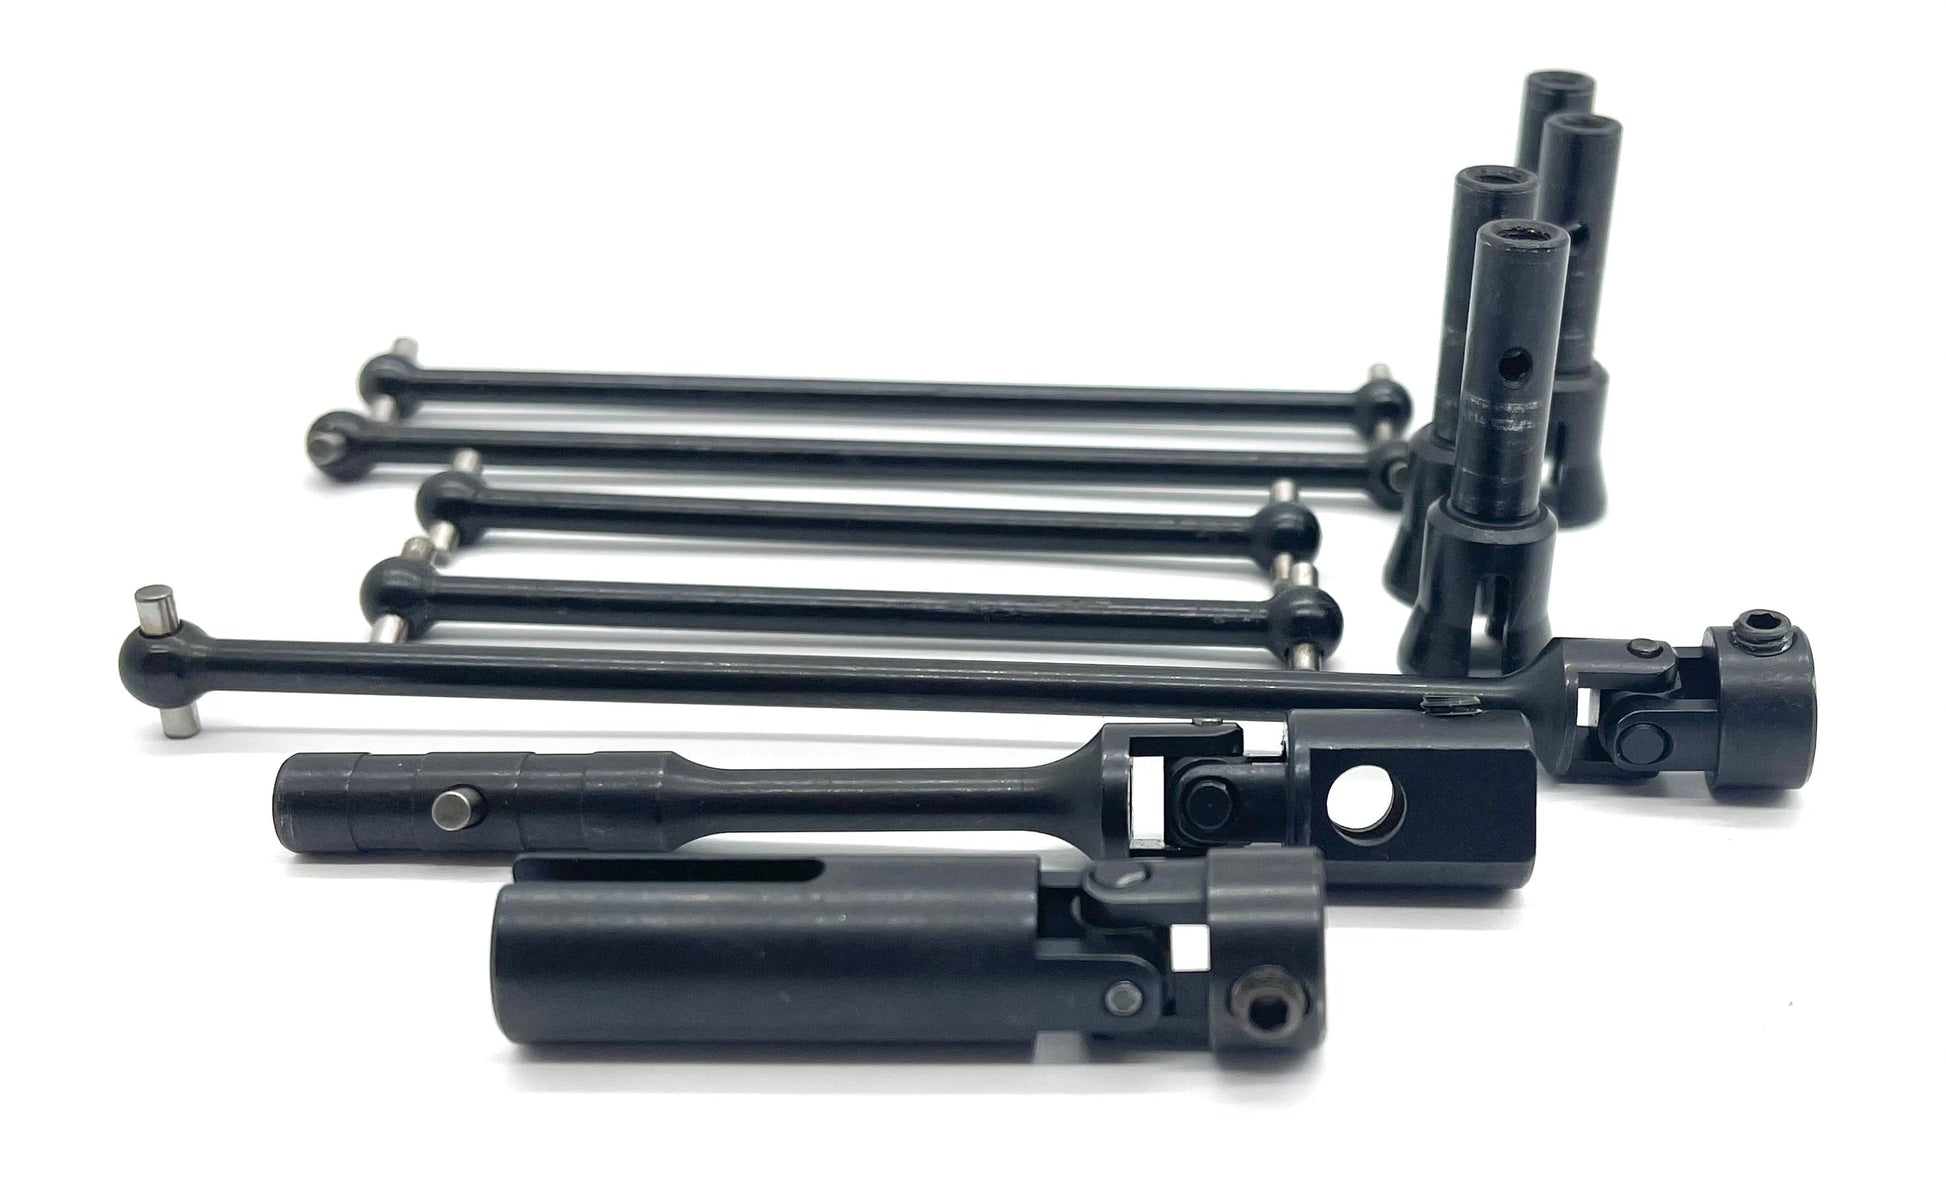 Kyosho USA-1 NITRO AXLES Drive Shafts Swingshafts kyosho KYO33155 - Dirt Cheap RC SAVING YOU MONEY, ONE PART AT A TIME